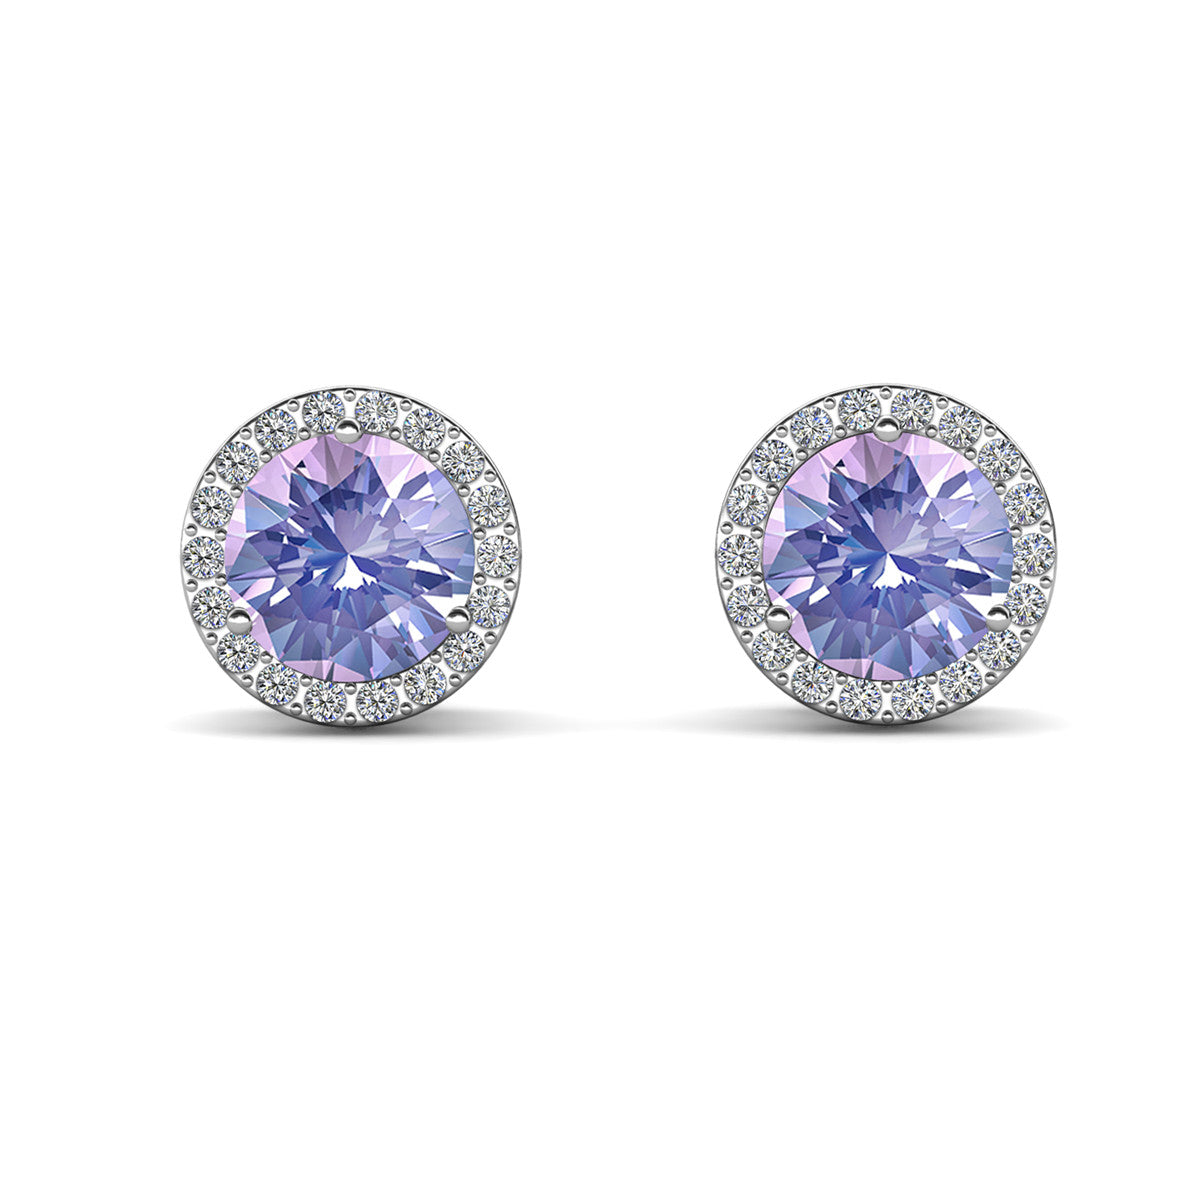 Royal June Birthstone Alexandrite Earrings, 18k White Gold Plated Silver Halo Earrings with Round Cut Crystals